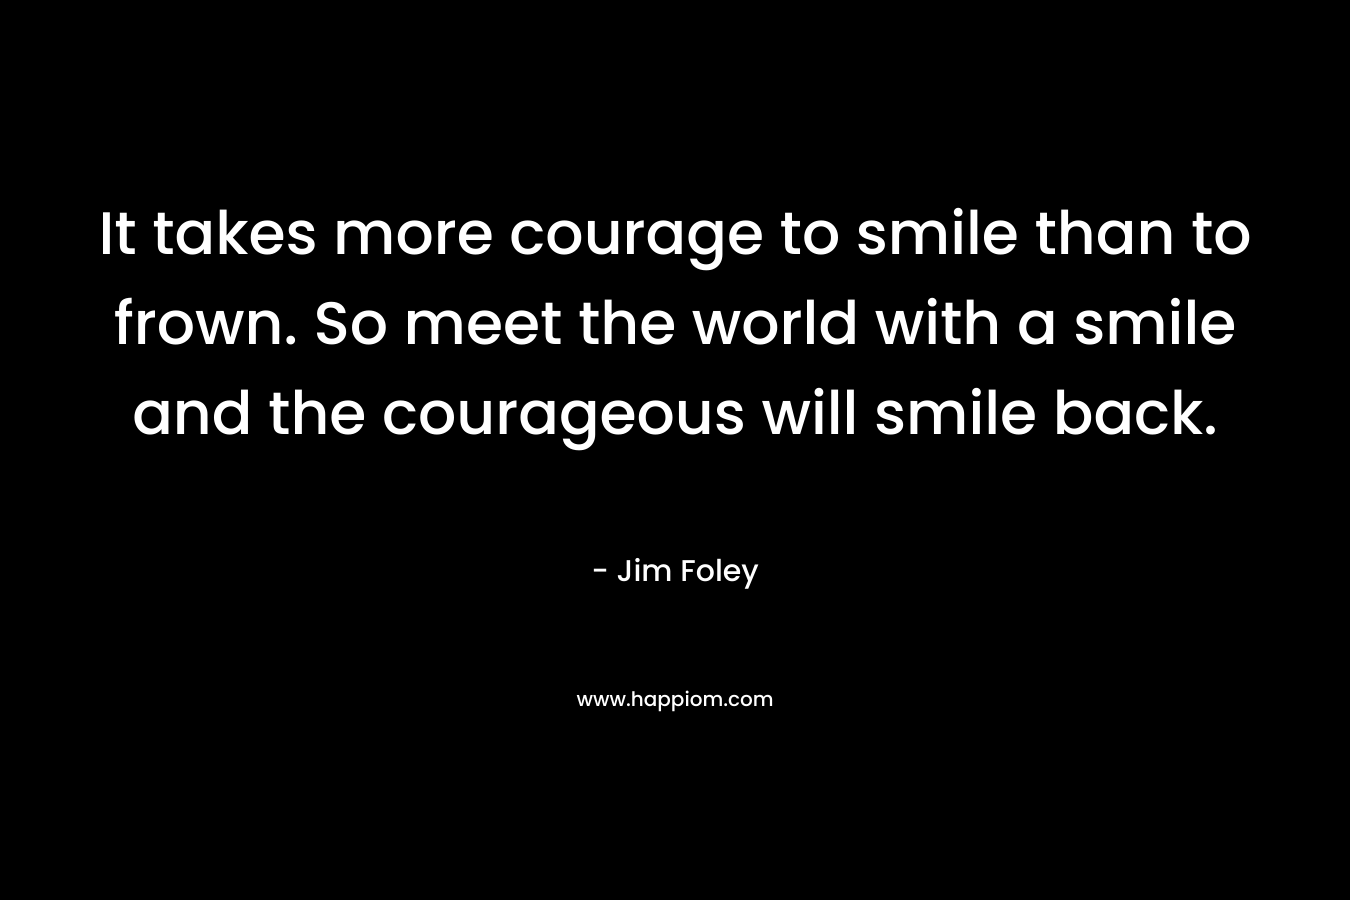 It takes more courage to smile than to frown. So meet the world with a smile and the courageous will smile back.